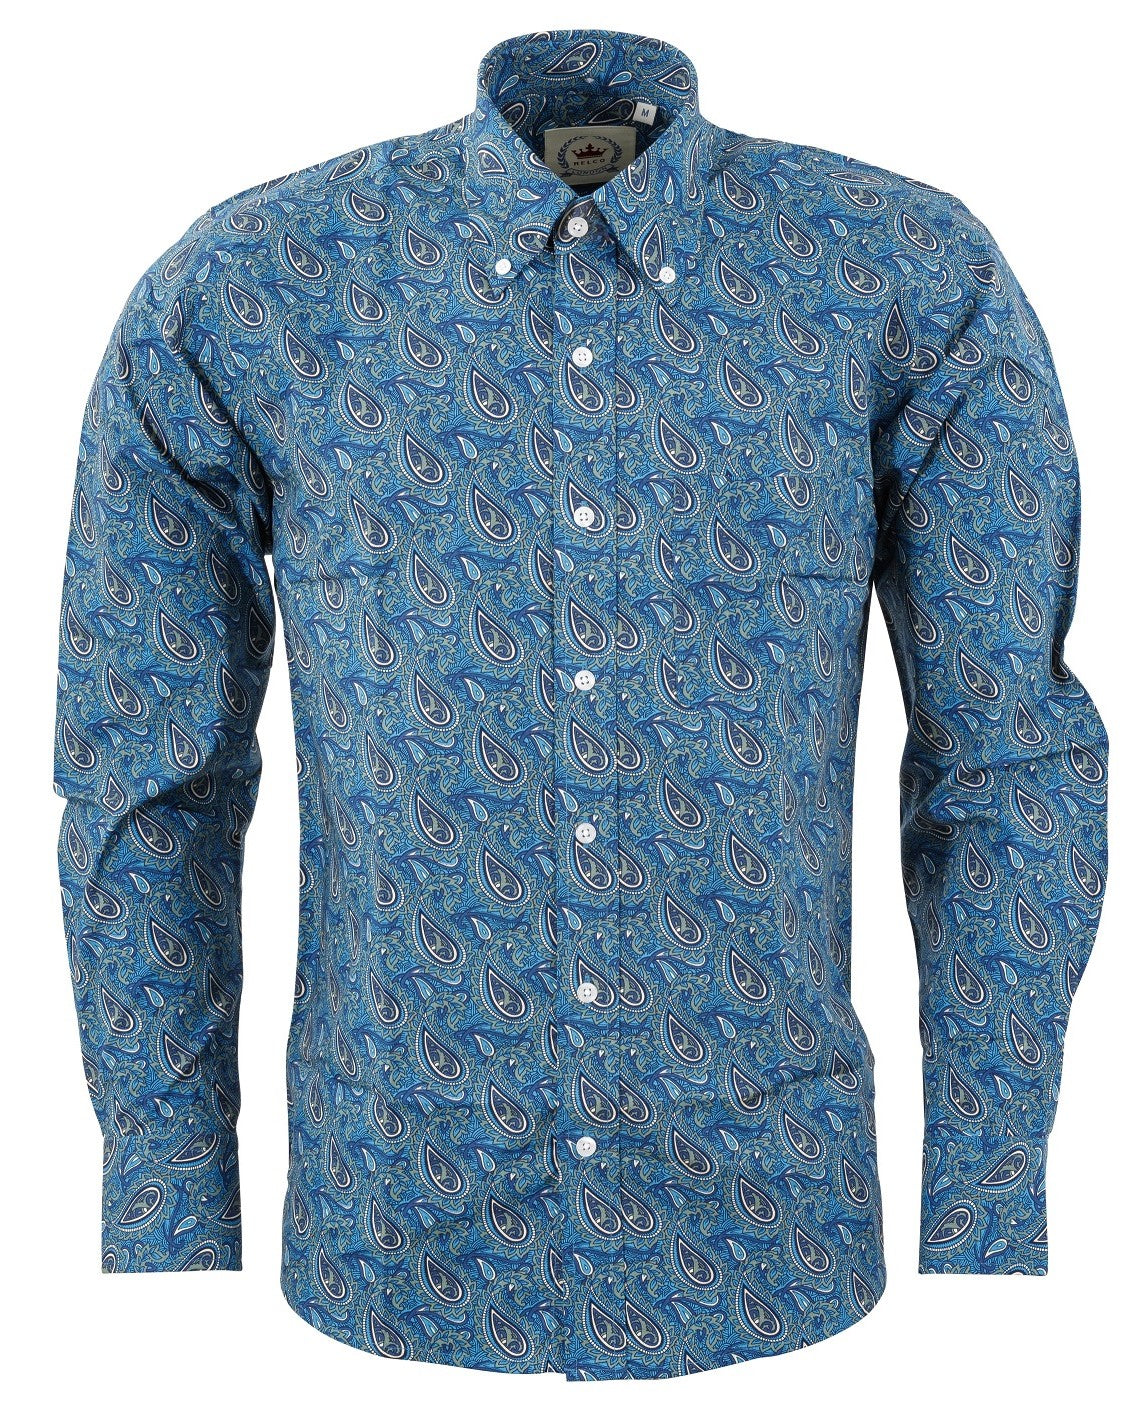 Relco Blue Paisley 100% Cotton Long Sleeved Button Down Shirts